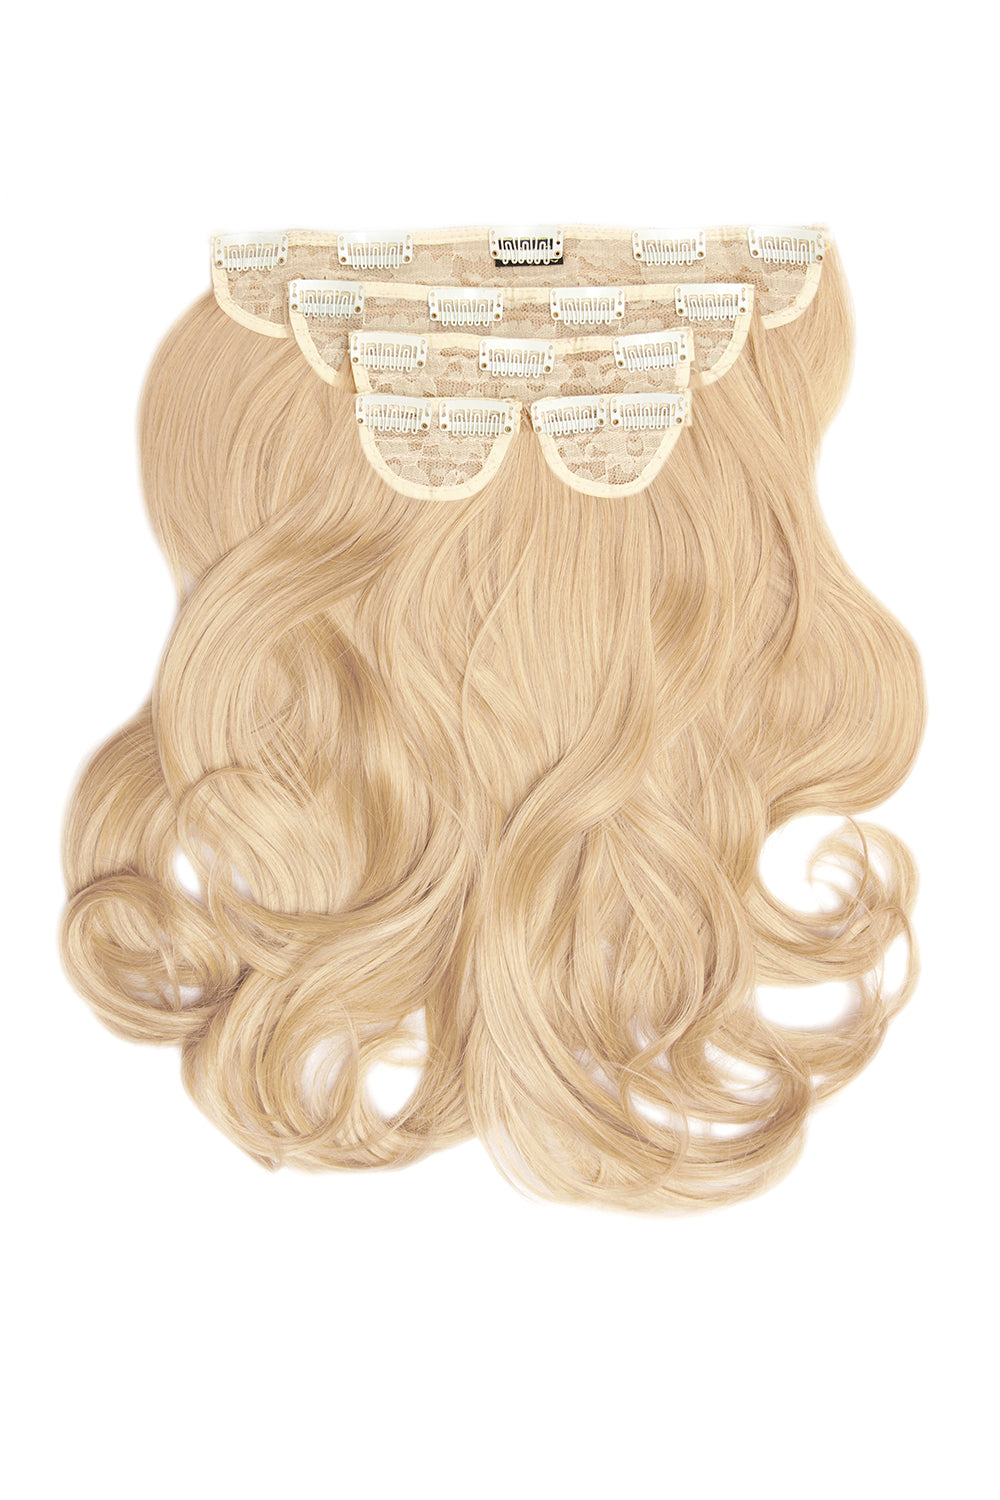 Super Thick 16" 5 Piece Blow Dry Wavy Clip In Hair Extensions - Champagne Blonde